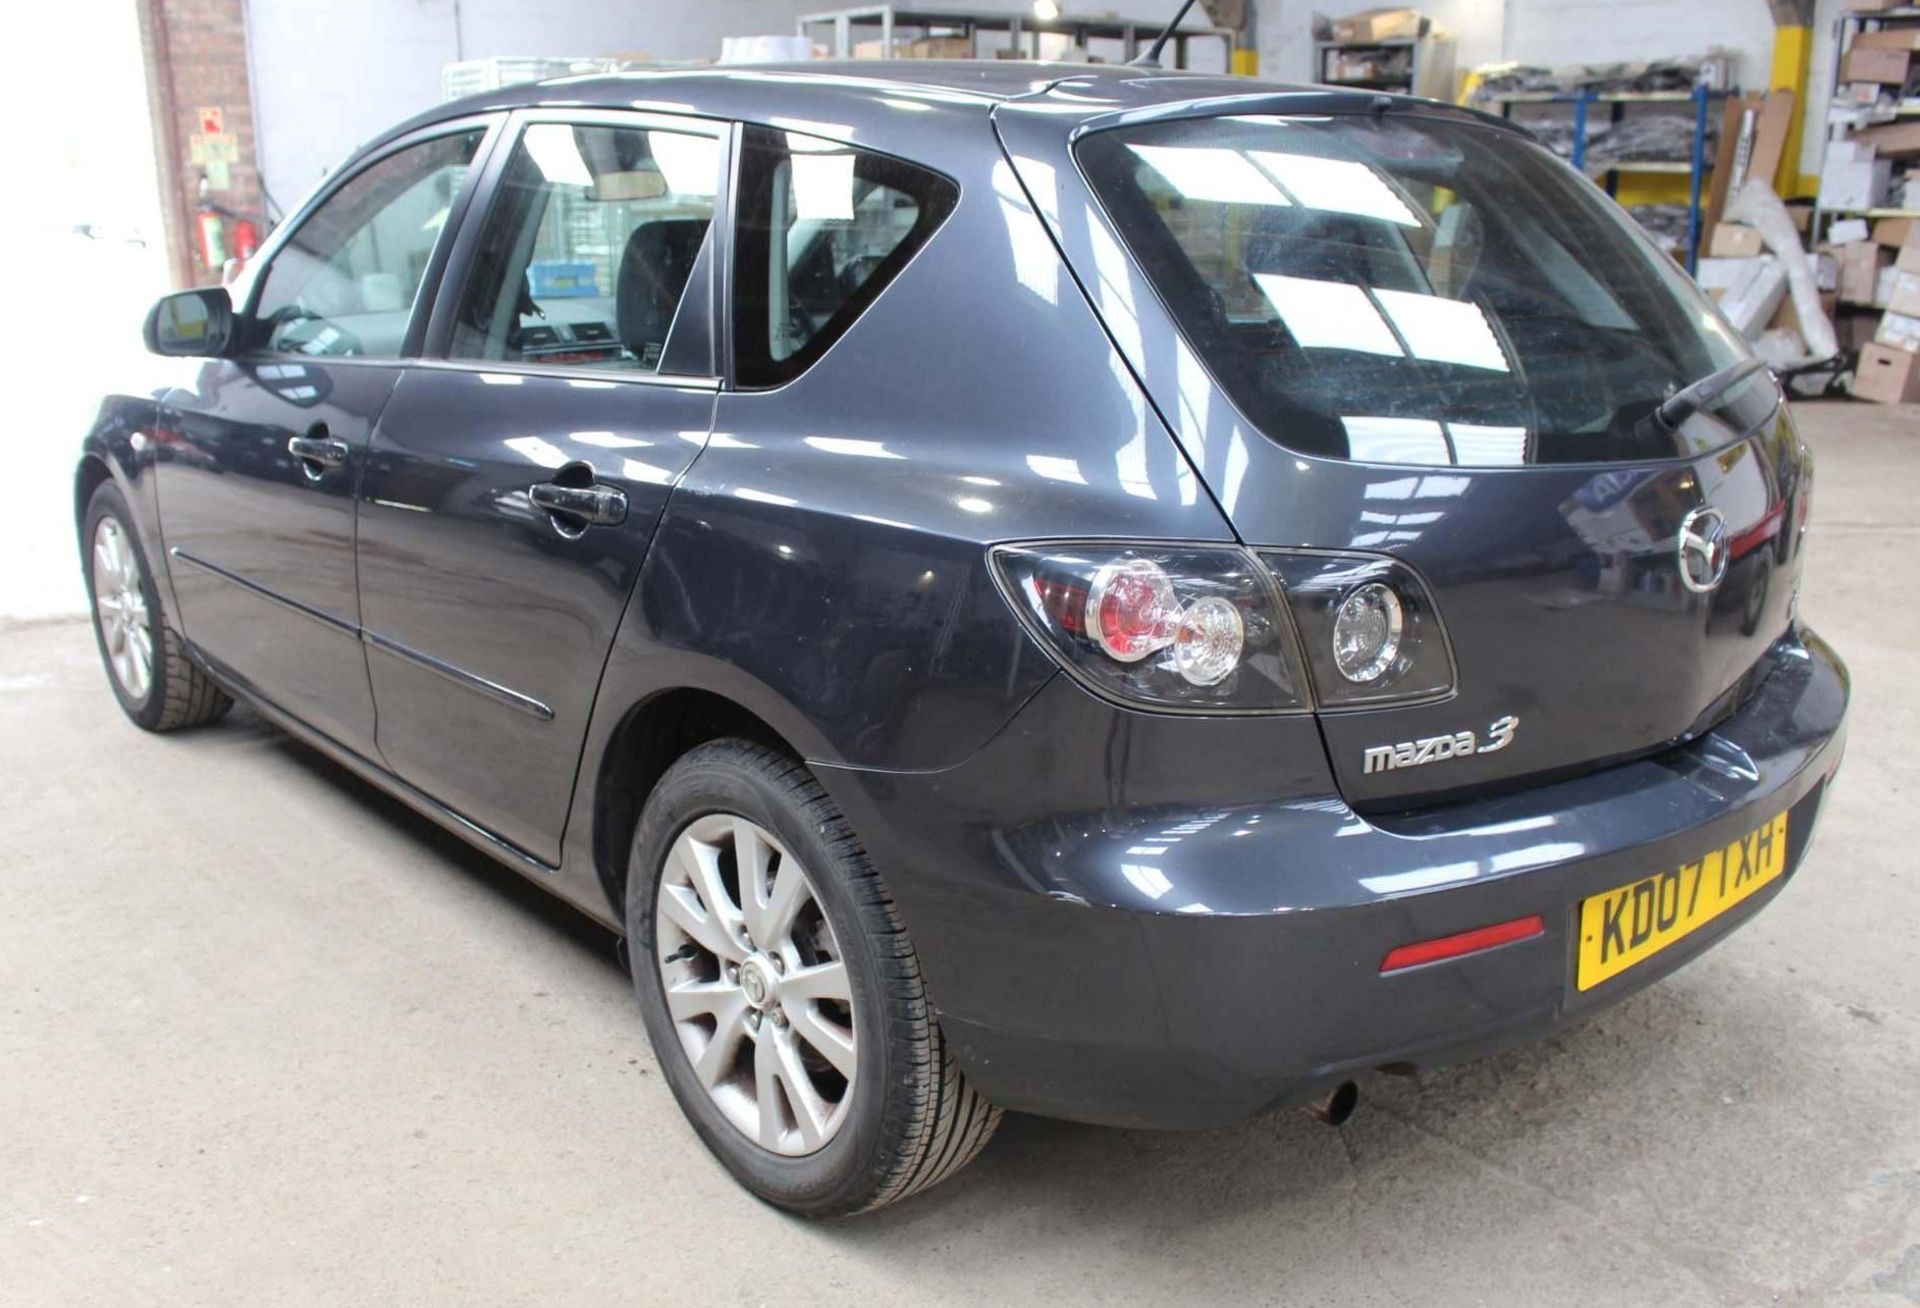 2007 Mazda3 1.6 TS2 5dr Hatchback - CL505 - NO VAT ON THE HAMMER - Location: Corby, Northamptonshire - Image 8 of 15